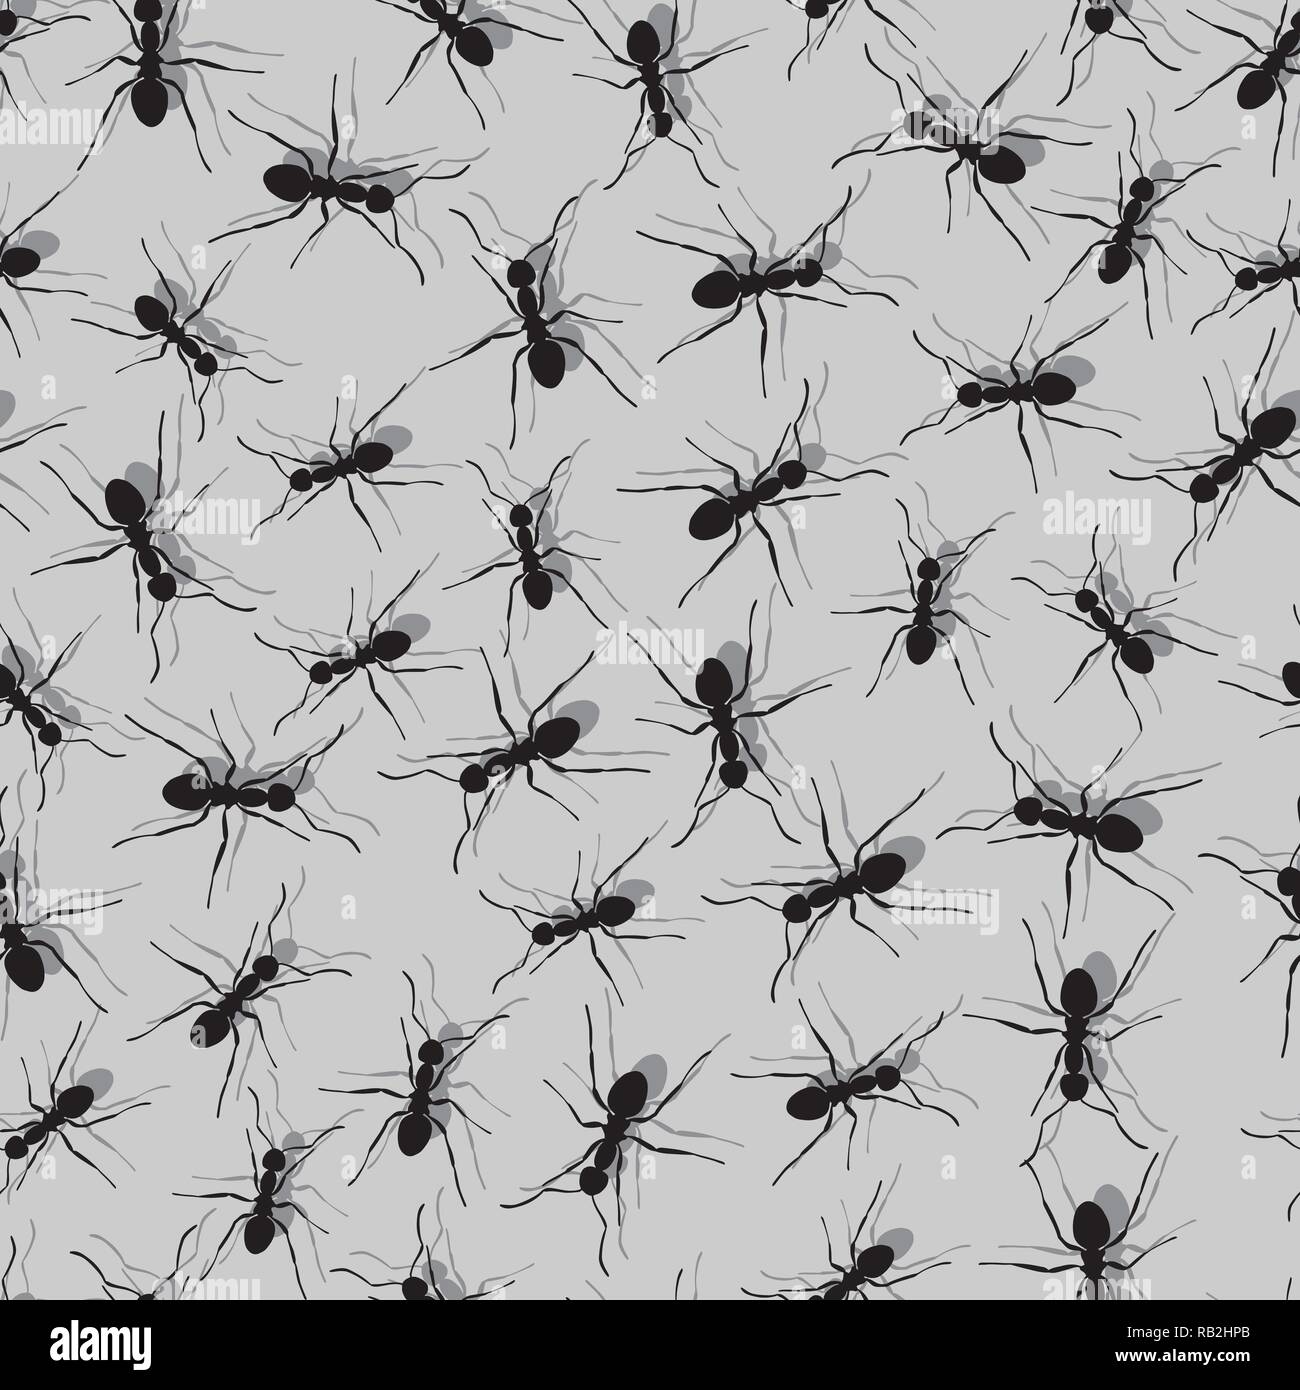 Monochrome Ant Seamless Pattern Representing Teamwork. Ants in Action. Fun and Disturbing Repeat Pattern Stock Vector